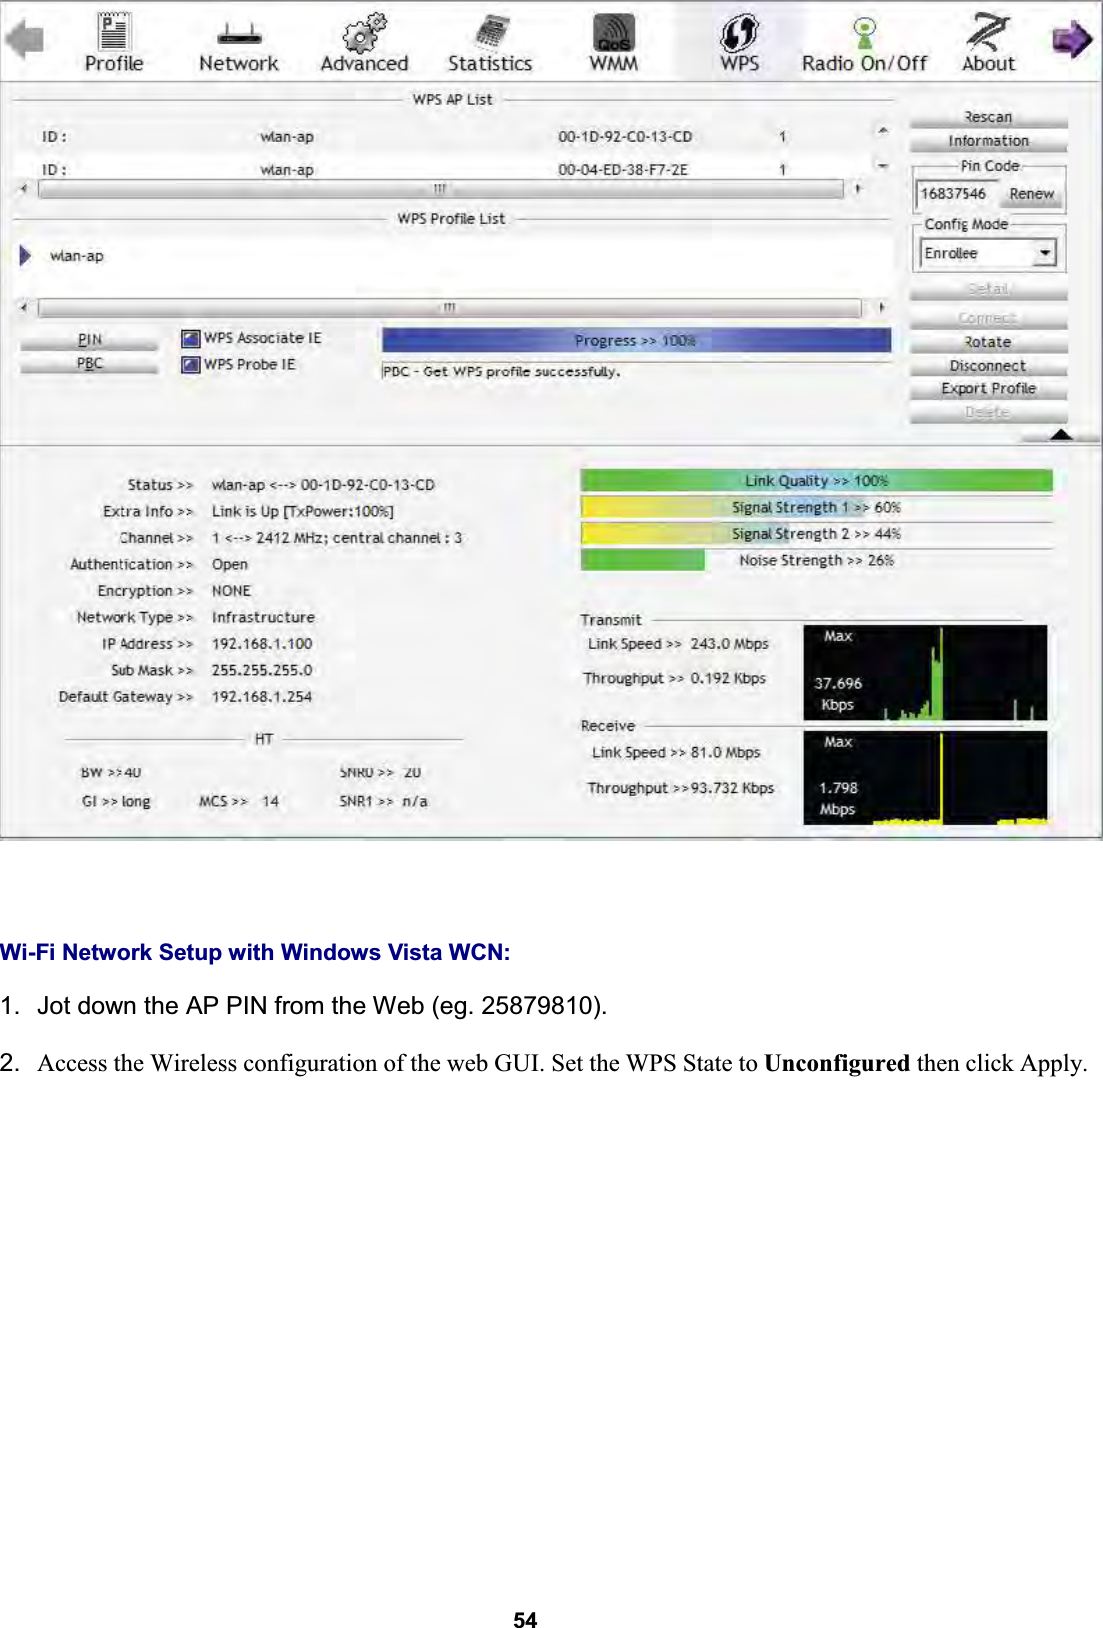  54     Wi-Fi Network Setup with Windows Vista WCN:  1.  Jot down the AP PIN from the Web (eg. 25879810).  2.  Access the Wireless configuration of the web GUI. Set the WPS State to Unconfigured then click Apply.  